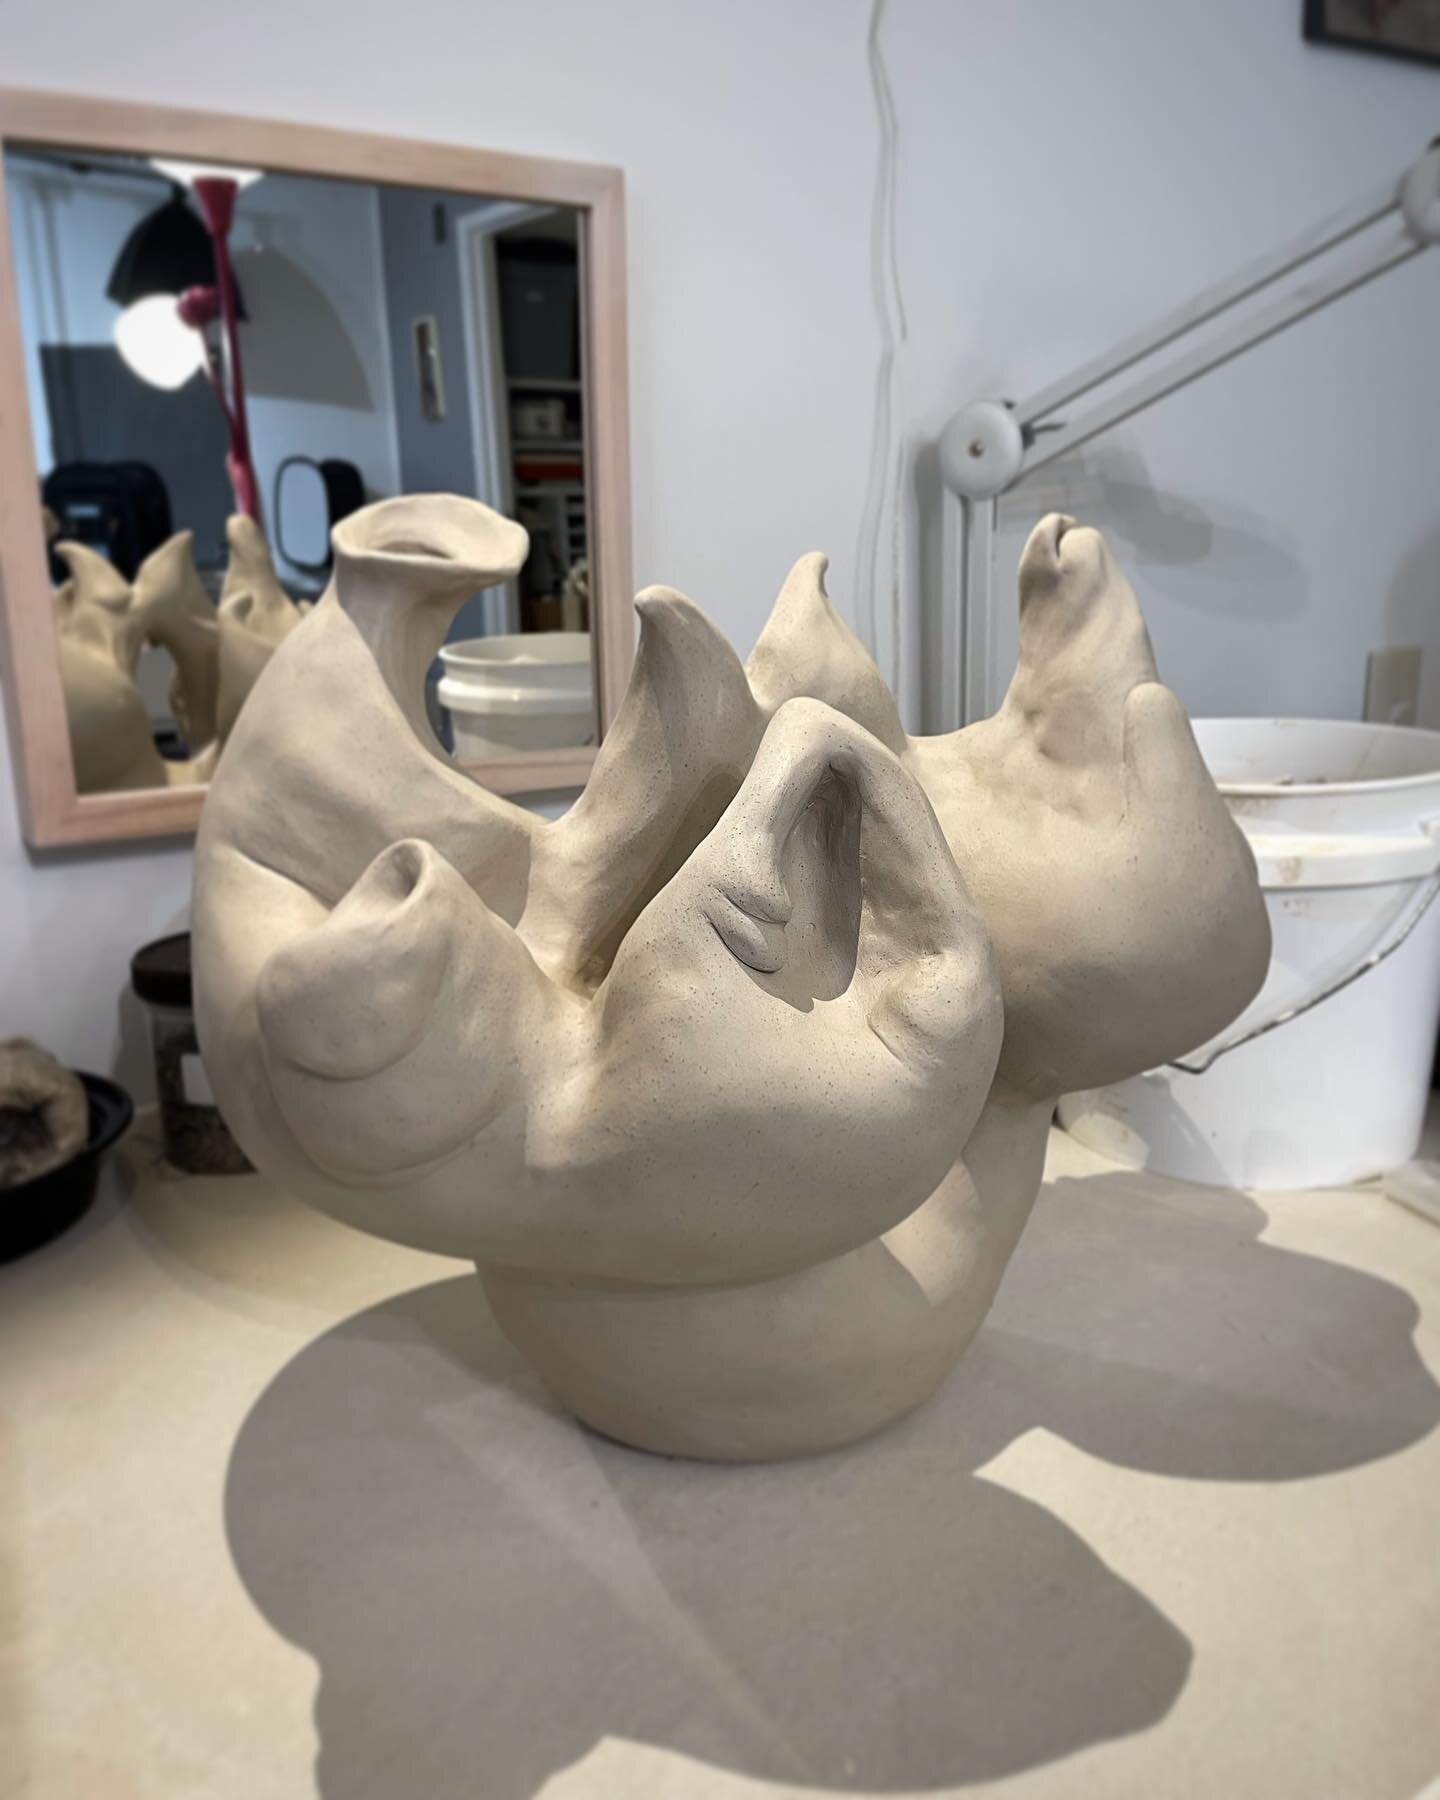 Sculpture work-in-progress. This first stage is basically done and now needs to dry slowly for a week or two before firing. Larger than recent work, maybe 15&rdquo; tall though it&rsquo;ll shrink in the kiln.